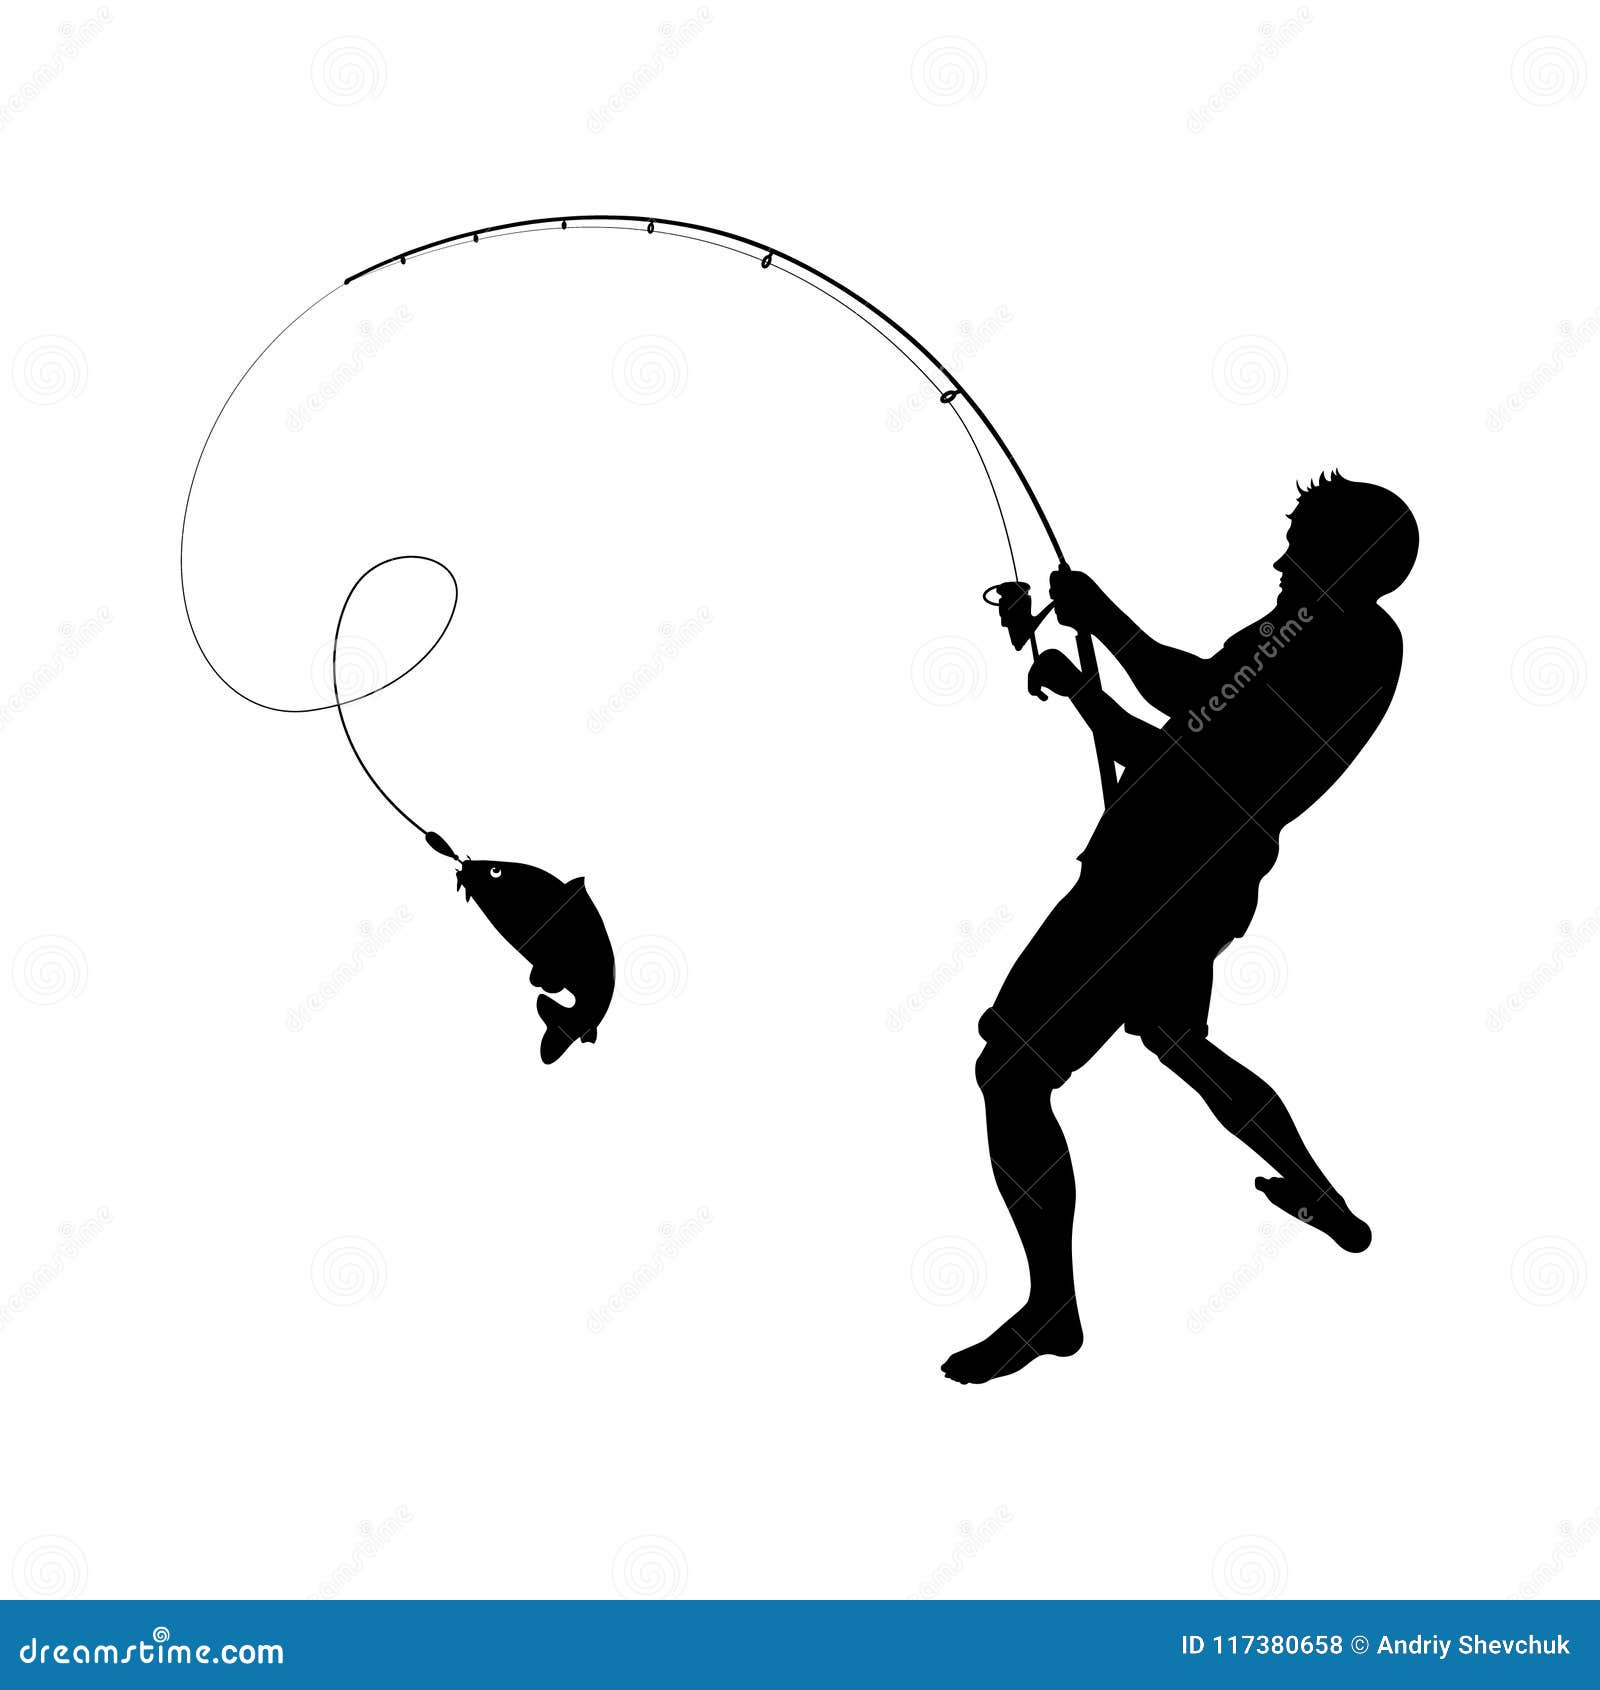 Download Fisherman Catches Fish On A Fishing Rod Stock Vector - Illustration of silhouette, sketch: 117380658